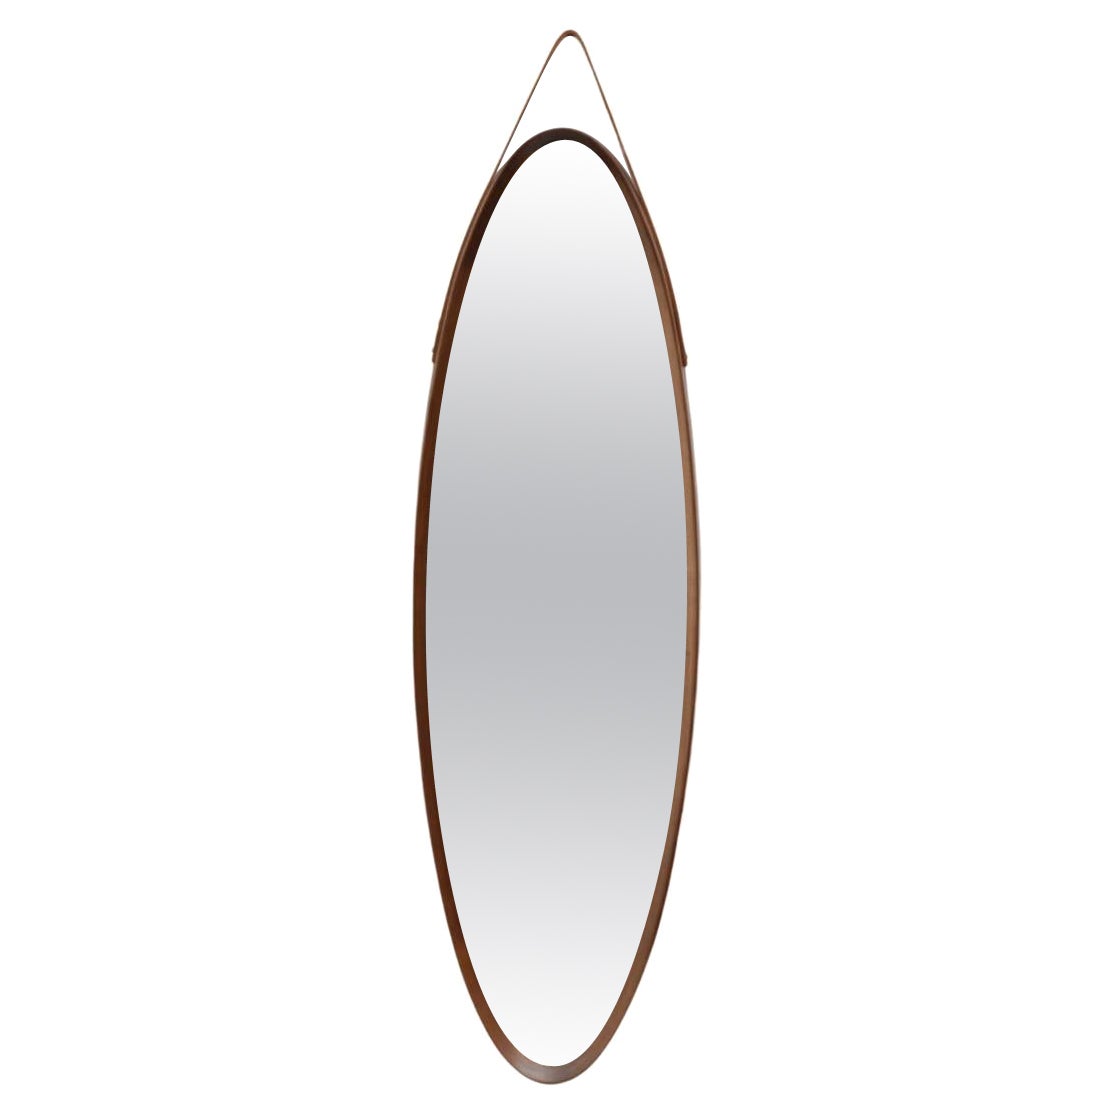 Mid-Century Jacques Adnet Inspired Oval Italian Teak Mirror with Leather Strap For Sale